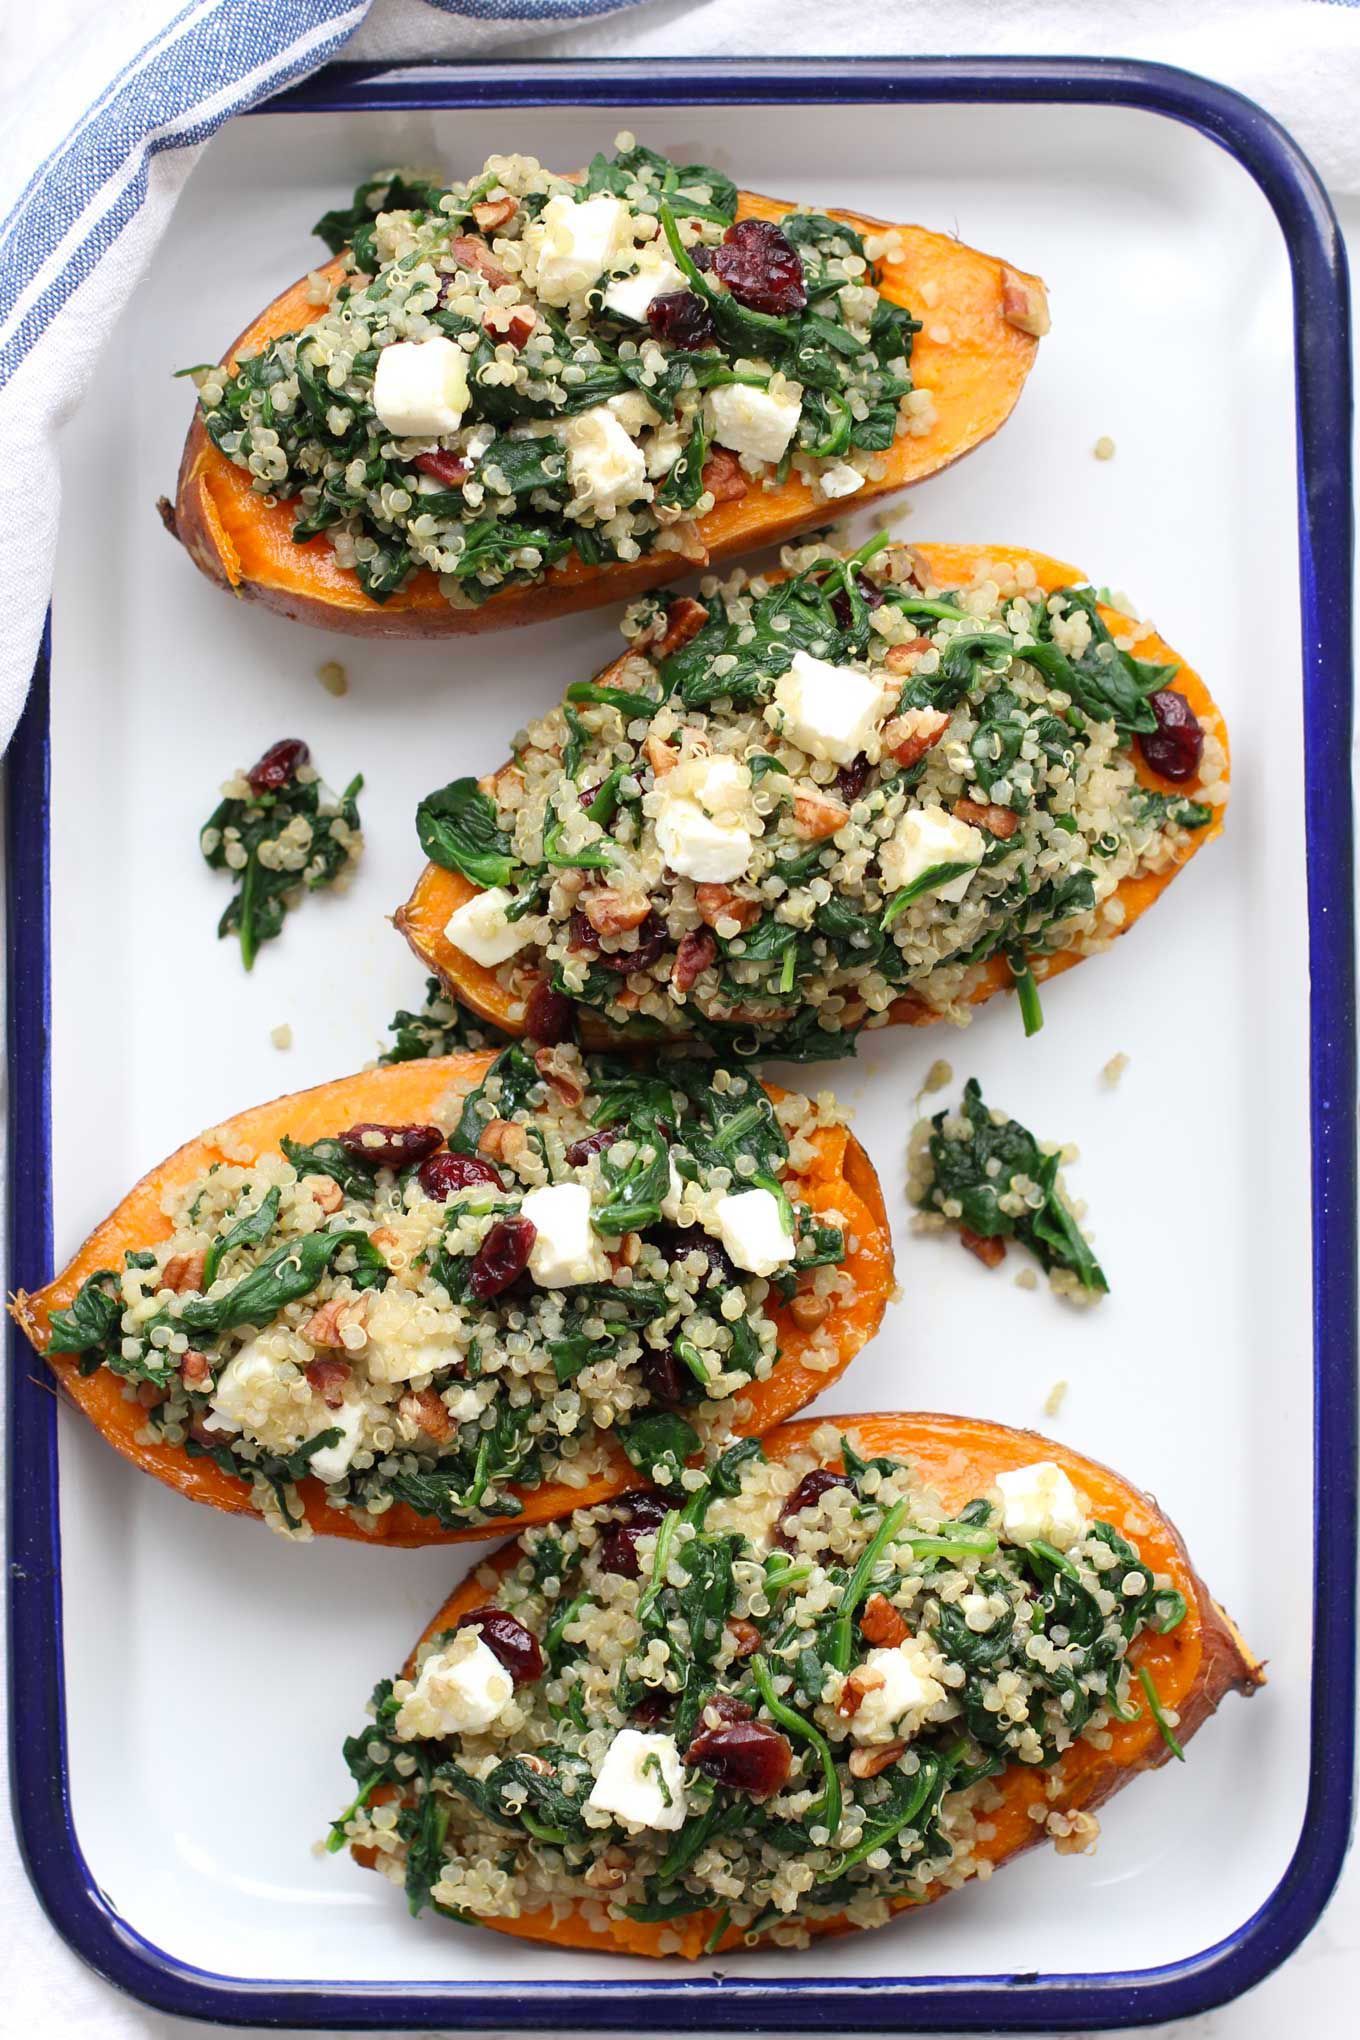 Roasted sweet potatoes stuffed with quinoa and spinach are a favorite fall dish. I